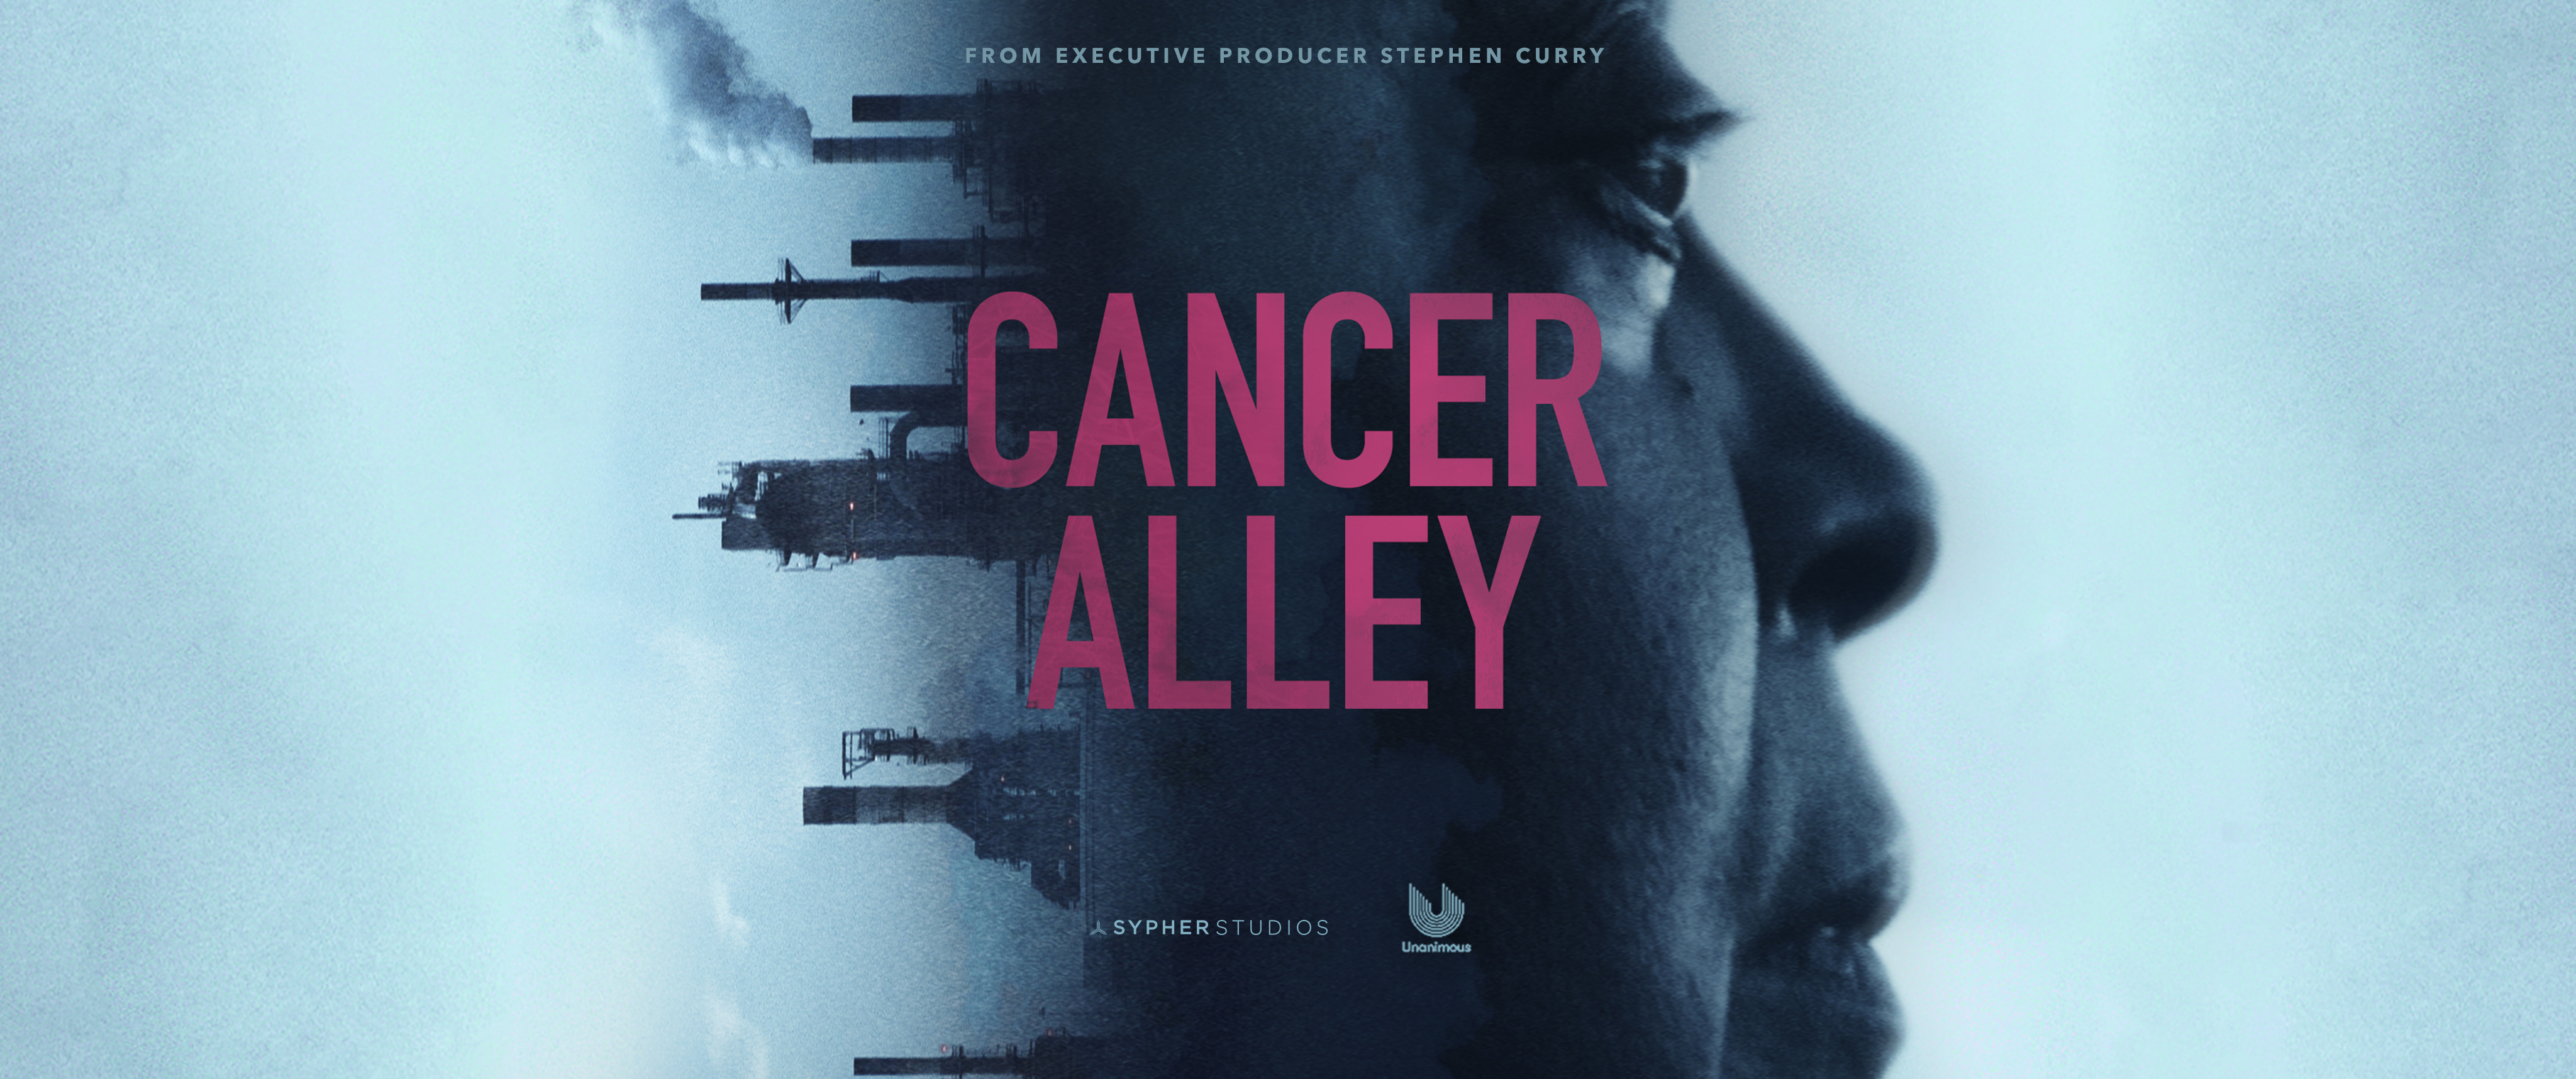 "Cancer Alley" movie poster